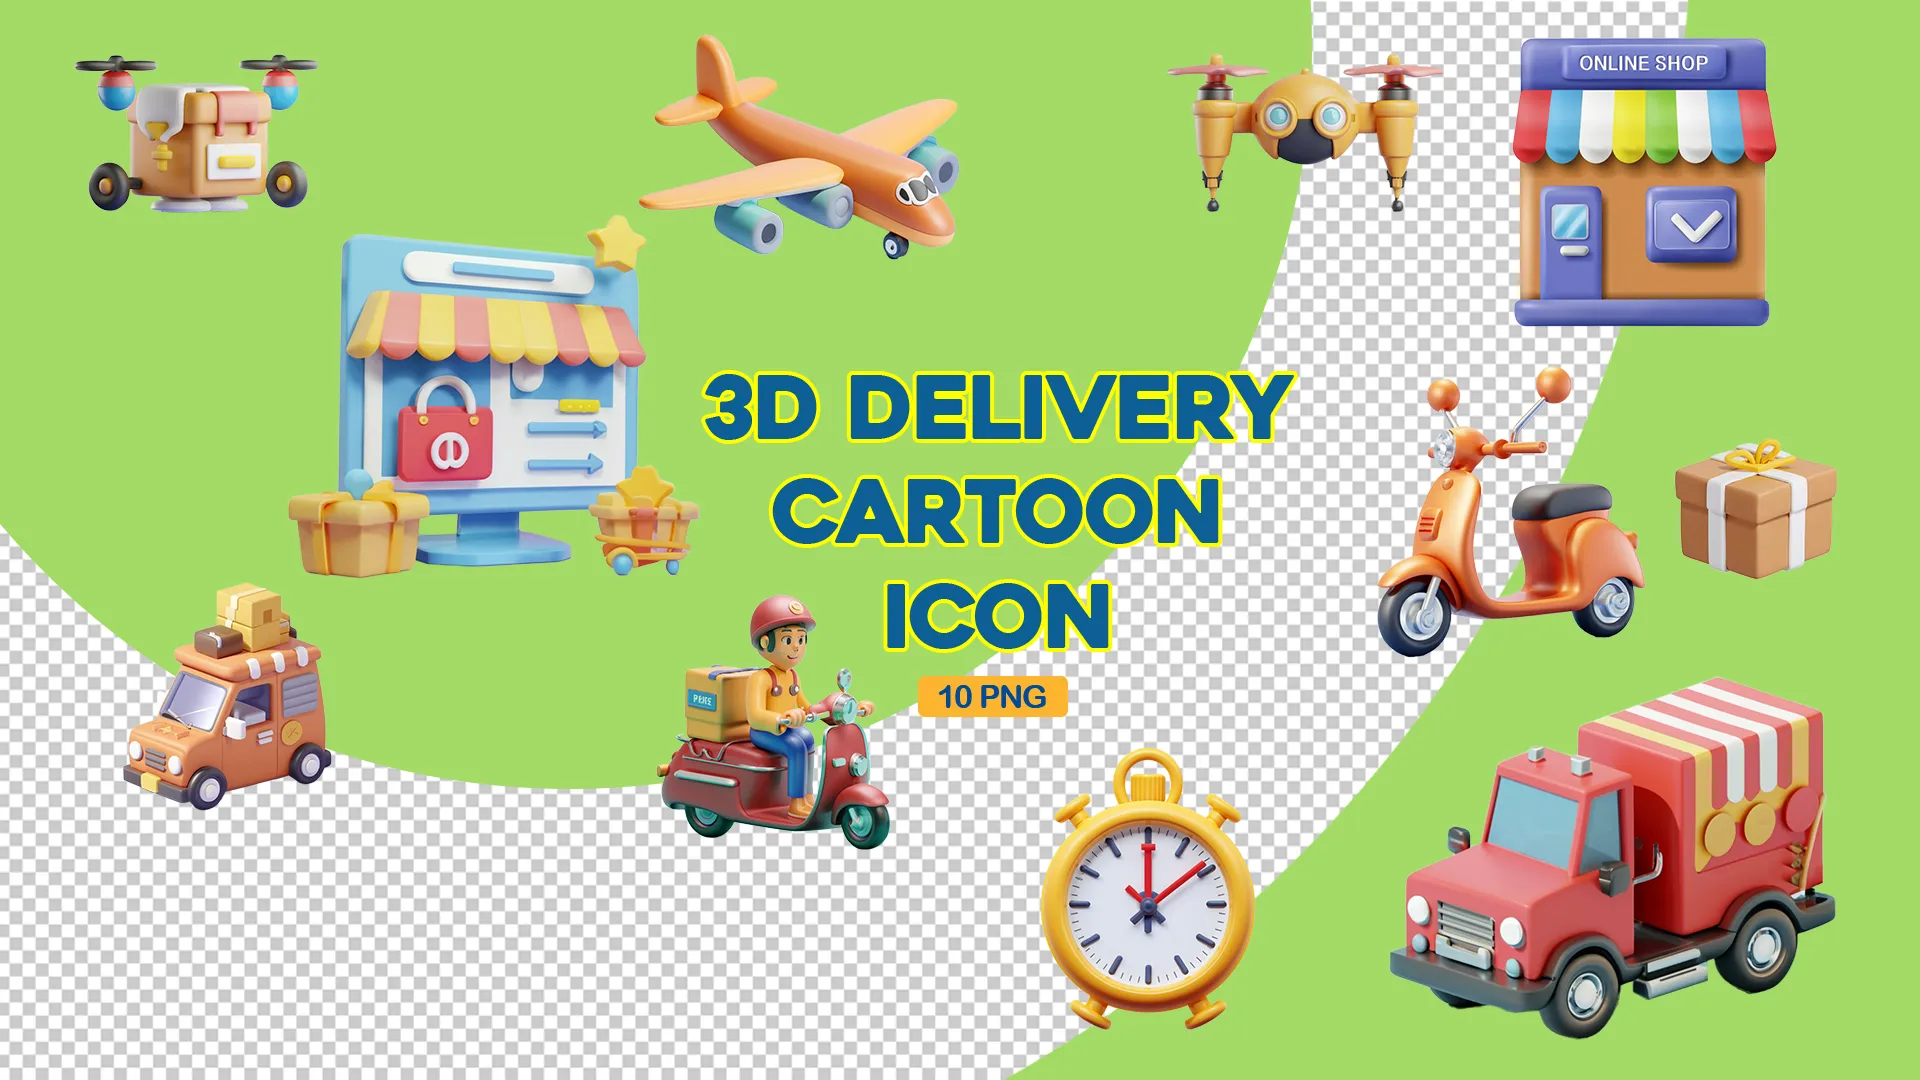 Unique 3D E-commerce and Delivery Icons Pack image